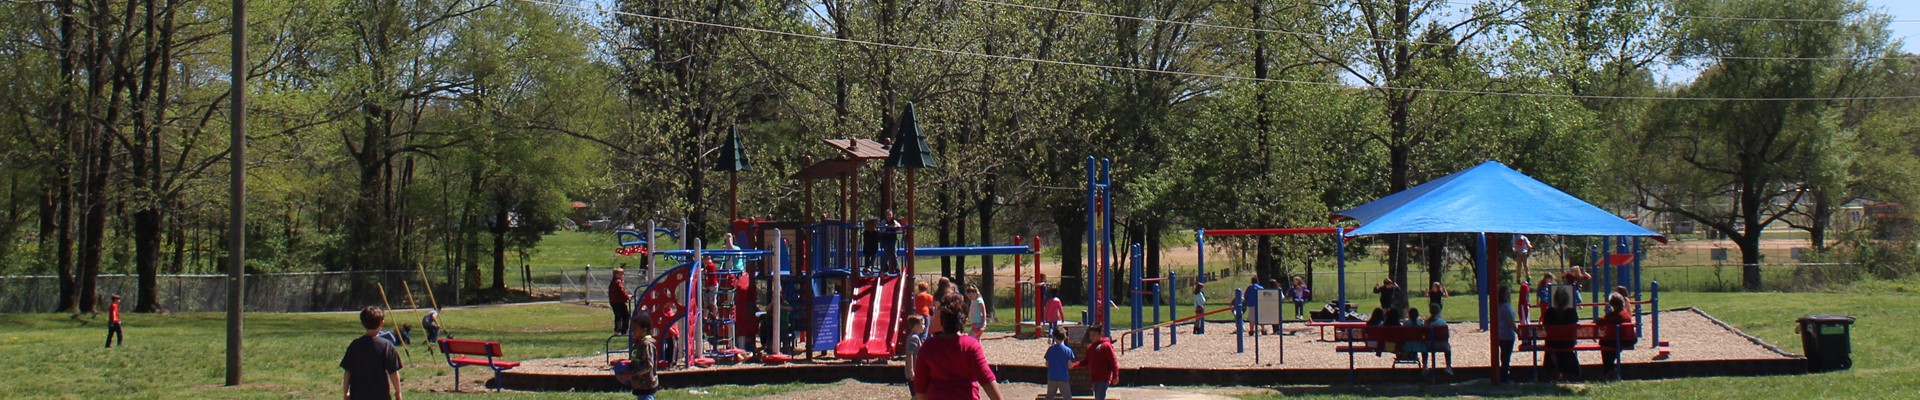 Students playing on playground equipment on a sunny day.